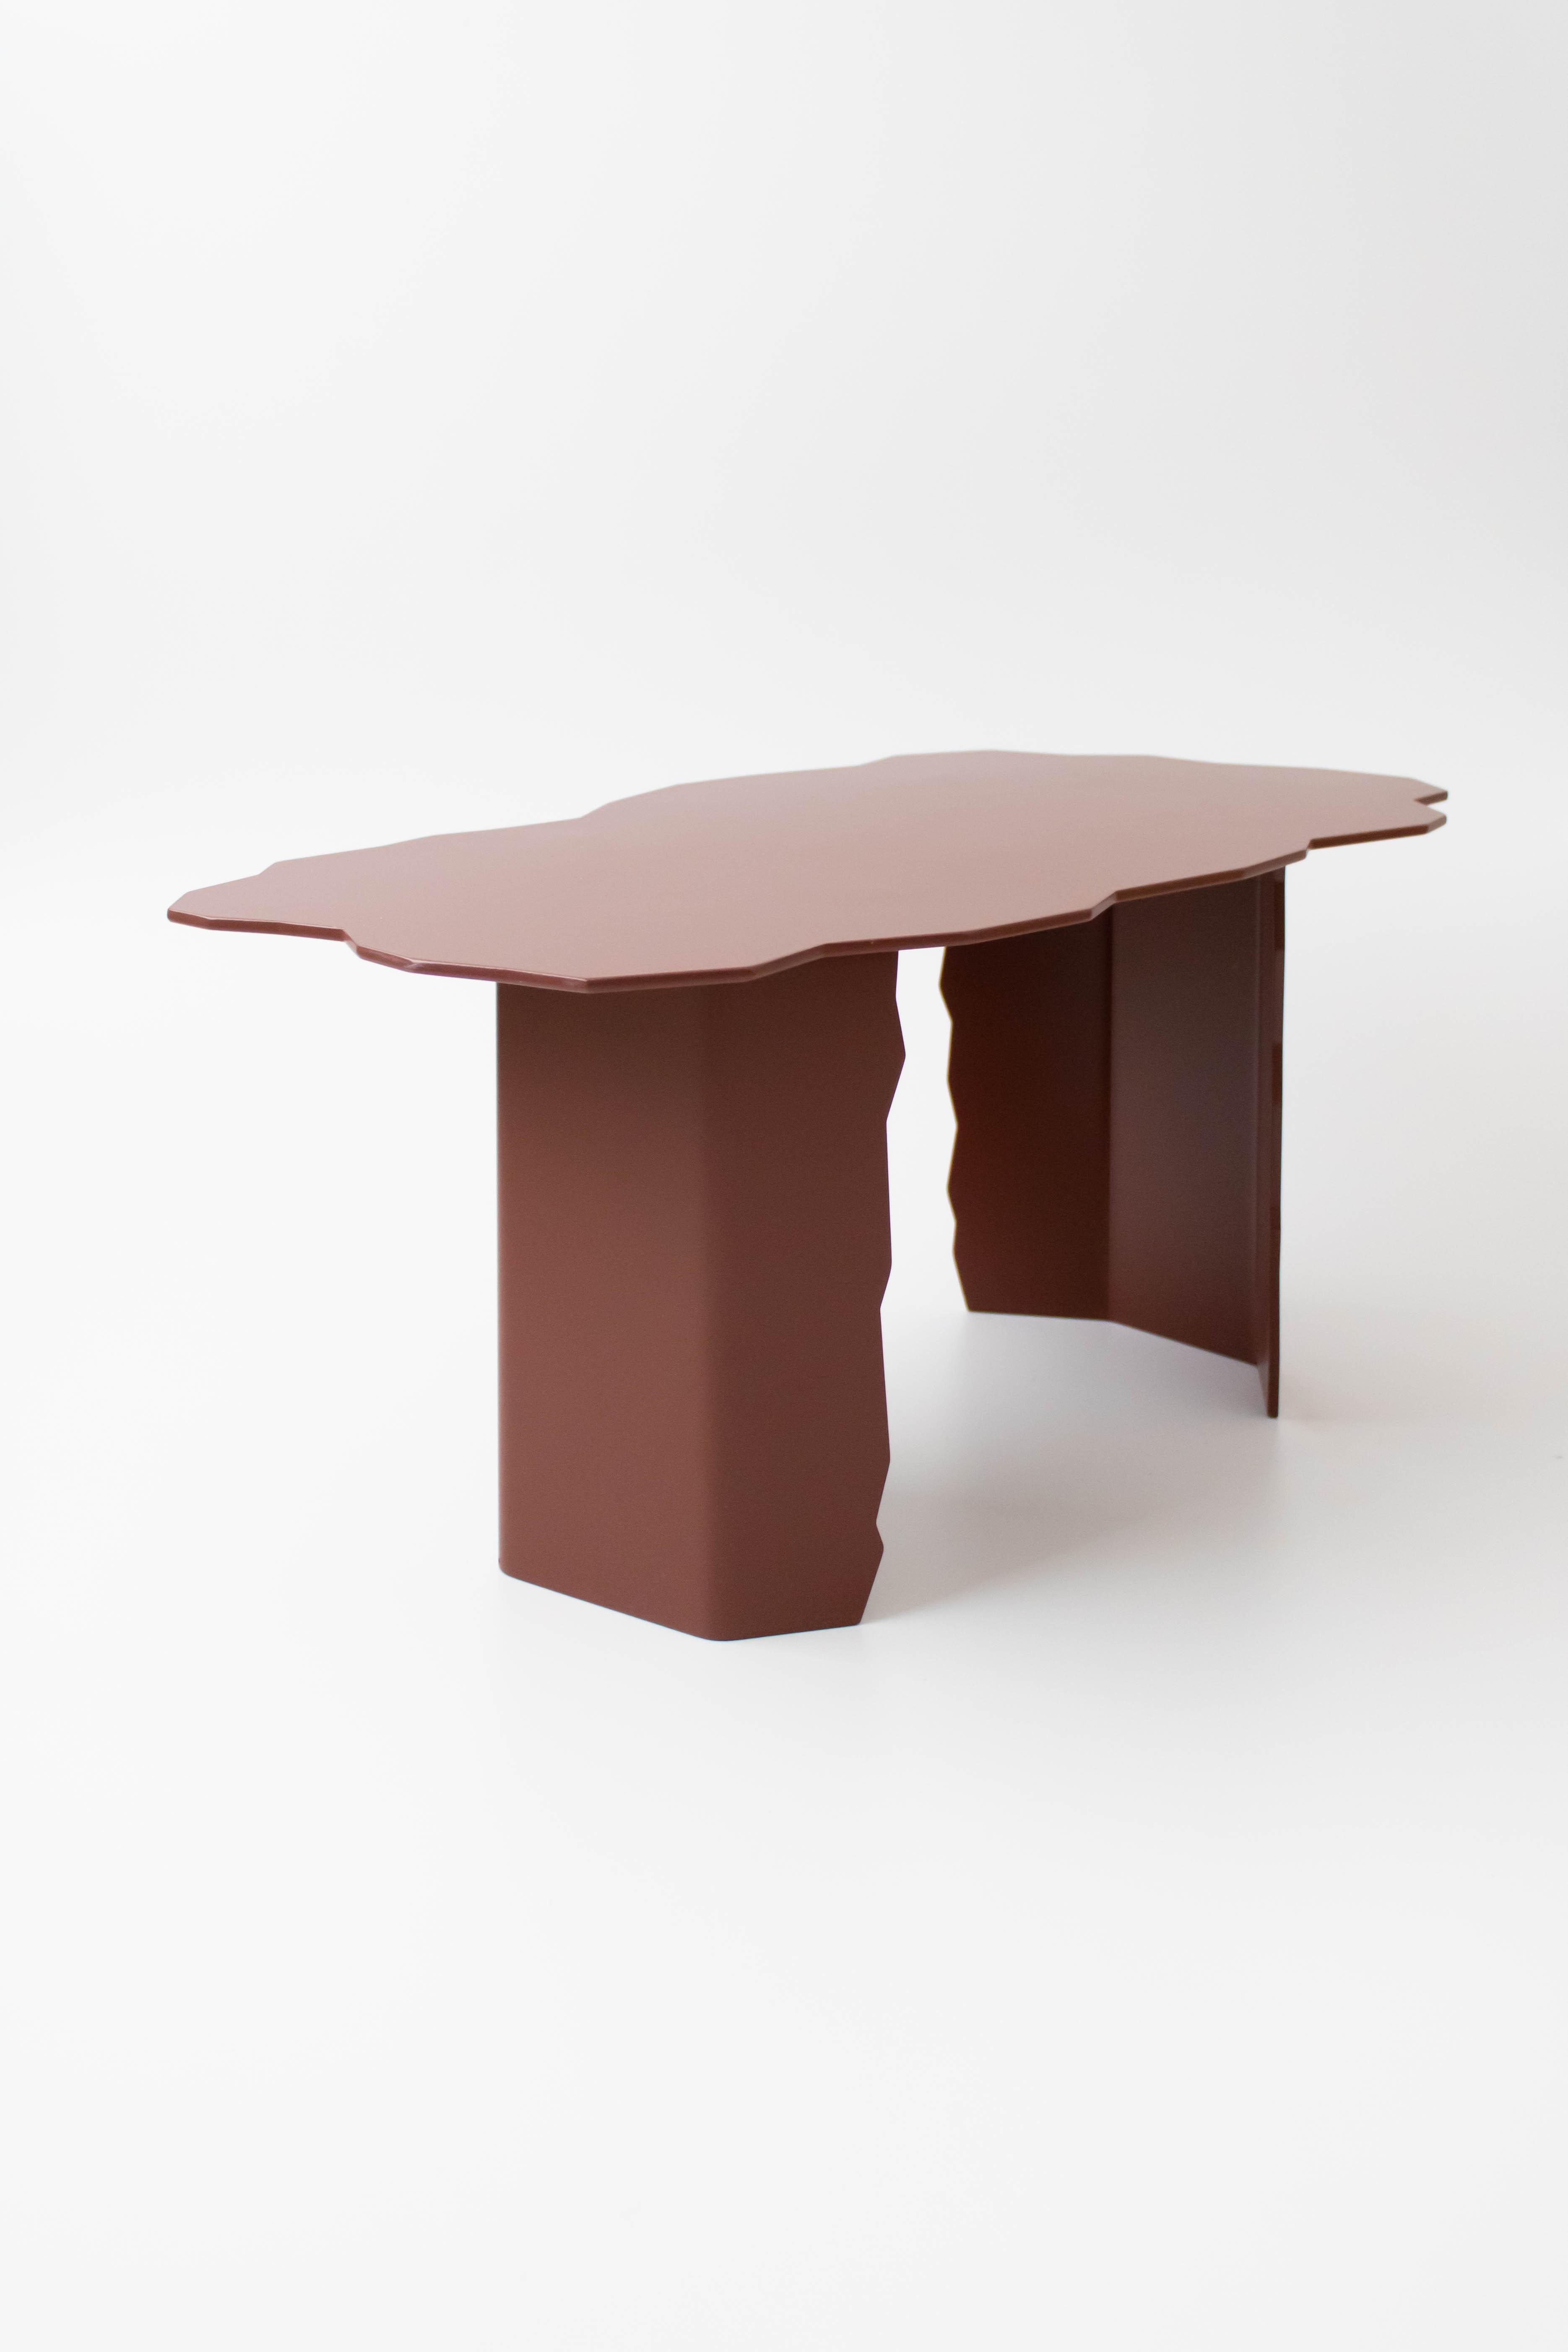 Disrupt low table by Arne Desmet
Dimensions: D42 x W75 x H34 cm
Materials: Powder coated aluminium.
Other colours available on request. 

The shapes of the Disrupt tables are inspired by the jagged edges formed by earth cracks. By means of